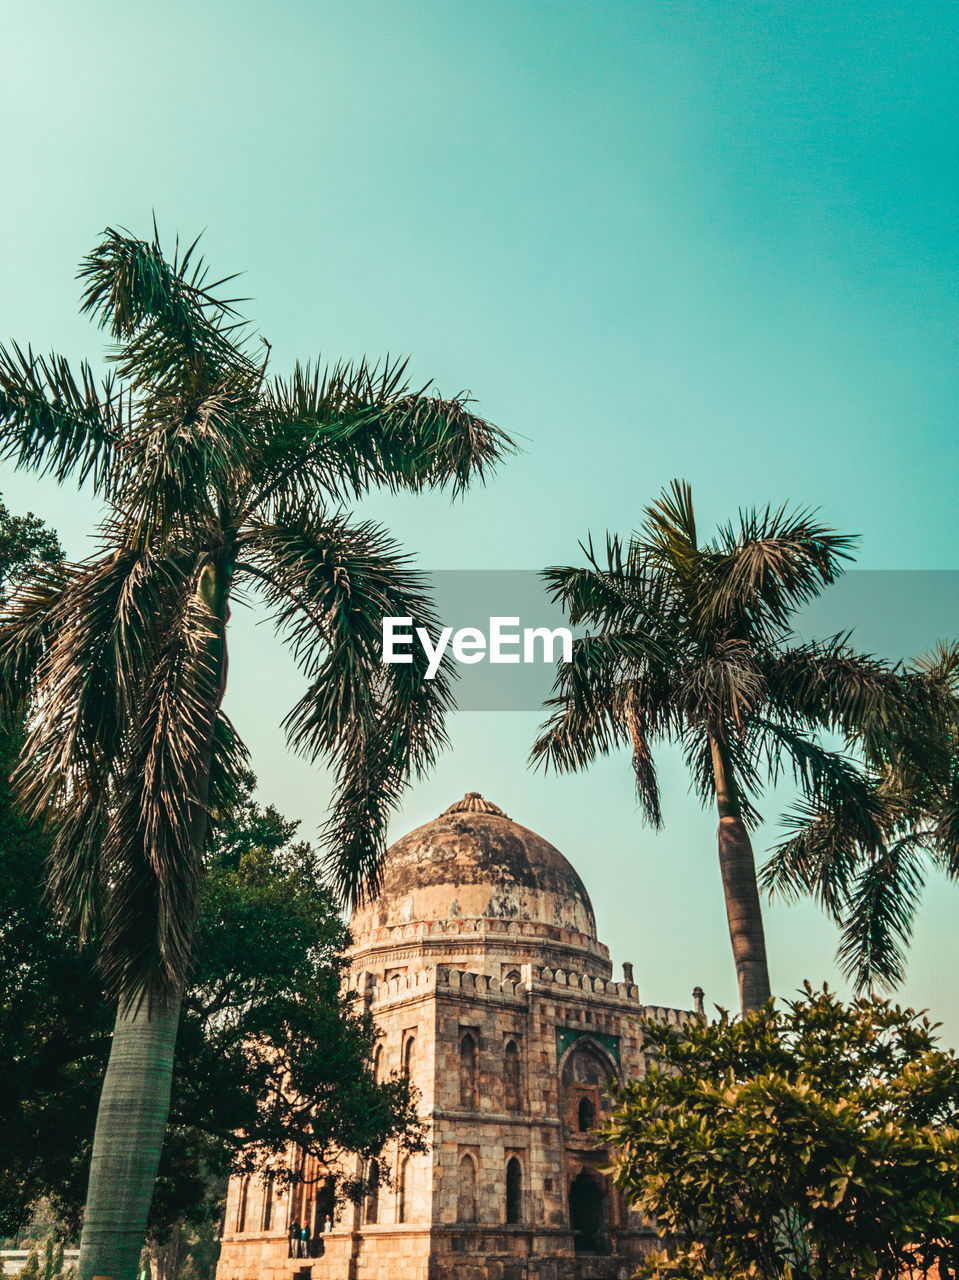 tree, palm tree, tropical climate, architecture, travel destinations, plant, history, travel, the past, sky, built structure, nature, tourism, building exterior, religion, ancient, date palm tree, outdoors, city, no people, belief, date palm, place of worship, building, clear sky, sunny, landmark, temple - building, day, spirituality